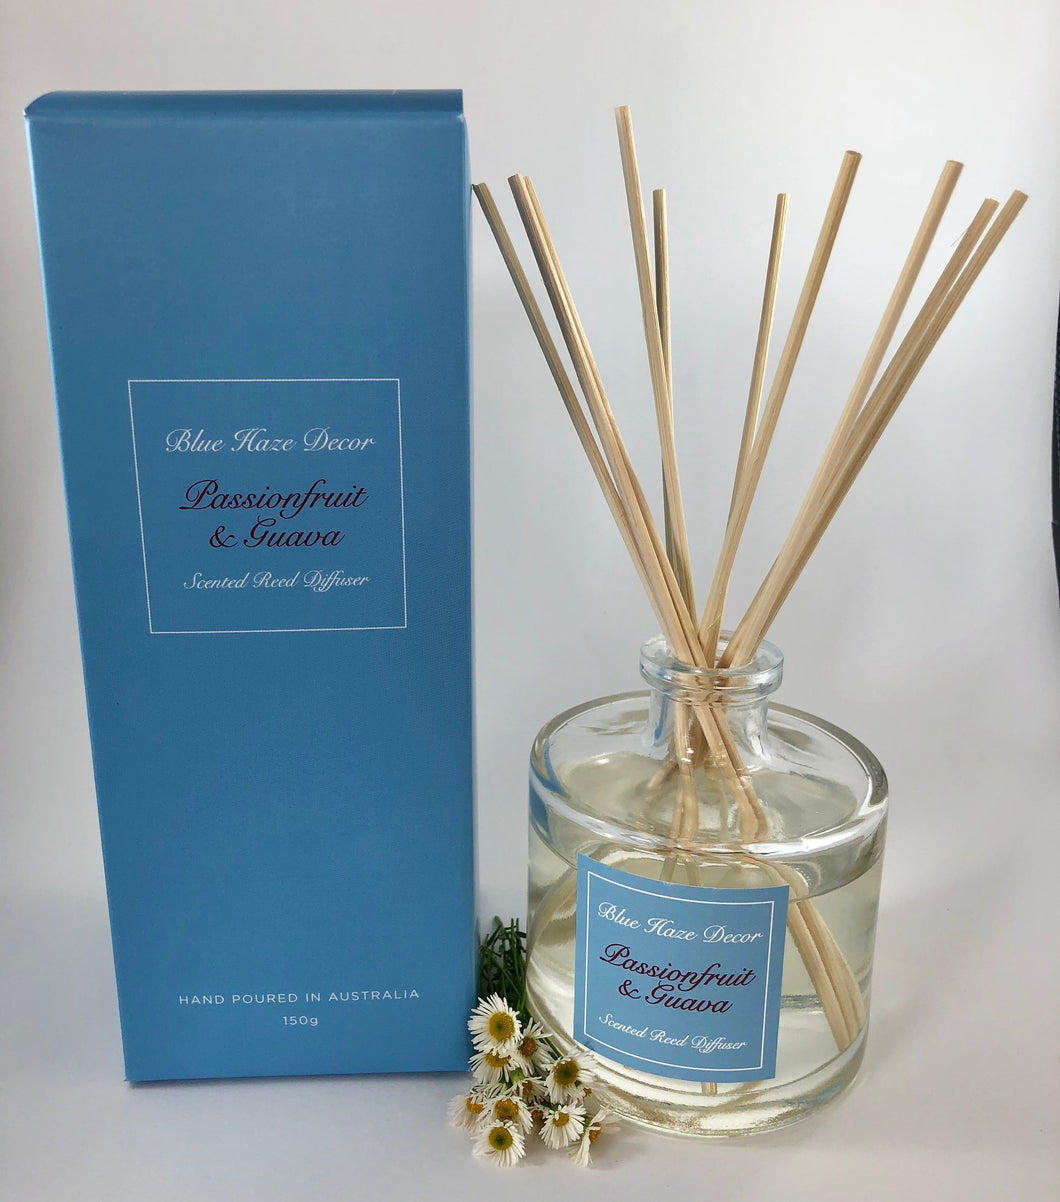 Passionfruit & Guava Reed Diffuser